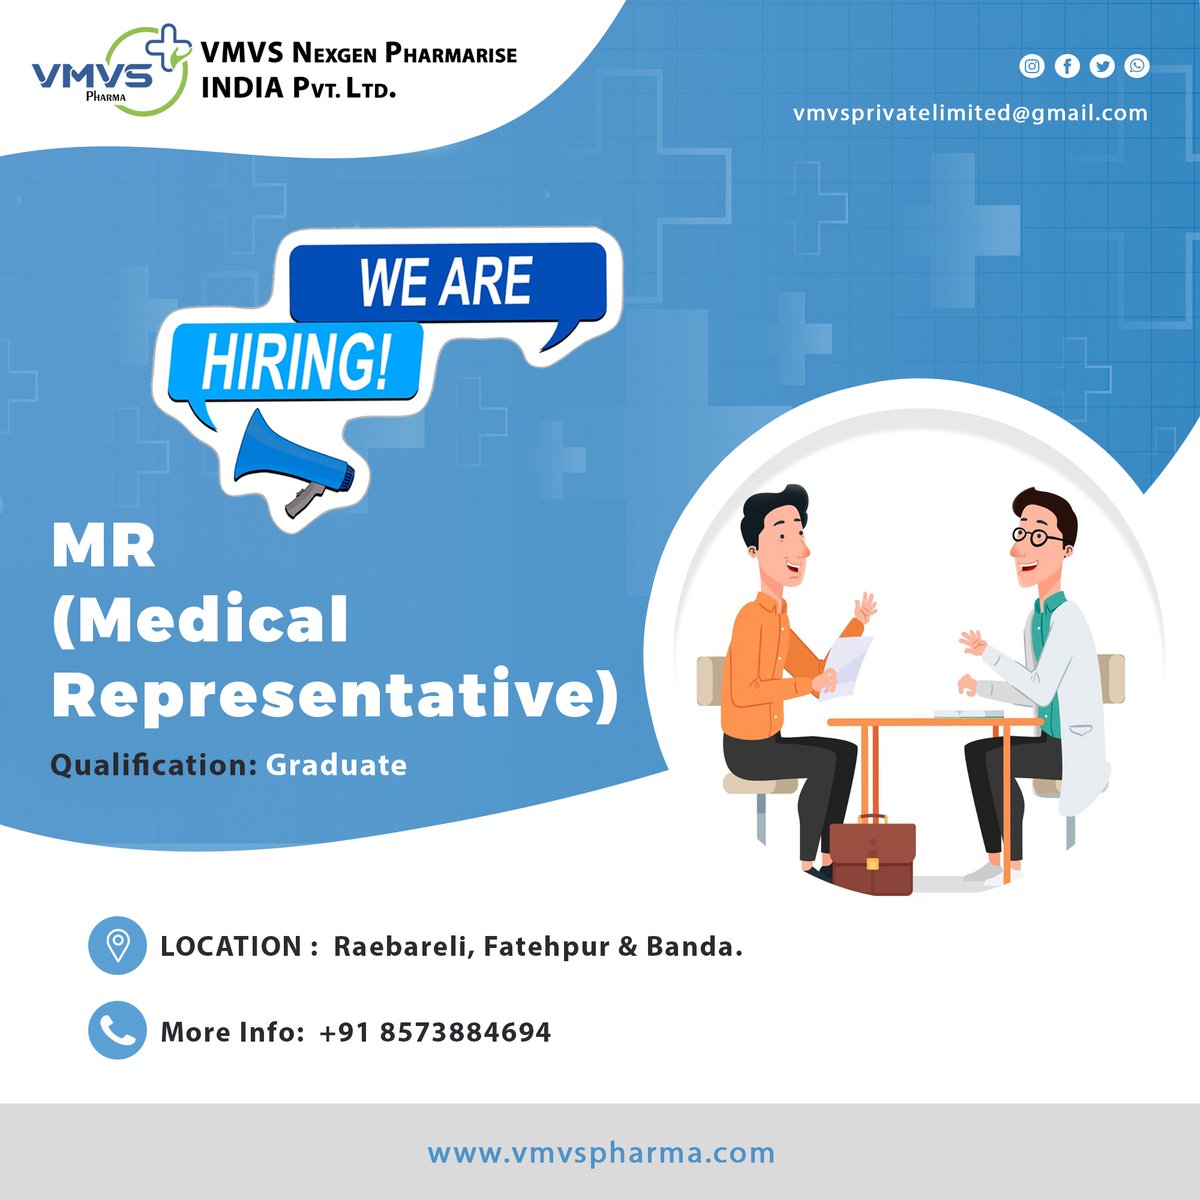 WE ARE HIRING!
Be a part of something big and join the MR team at VMVS Pharma, driving innovation in healthcare.
#InnovatingHealthcare
#HealthcareforAll
#JoinVMVSTeam